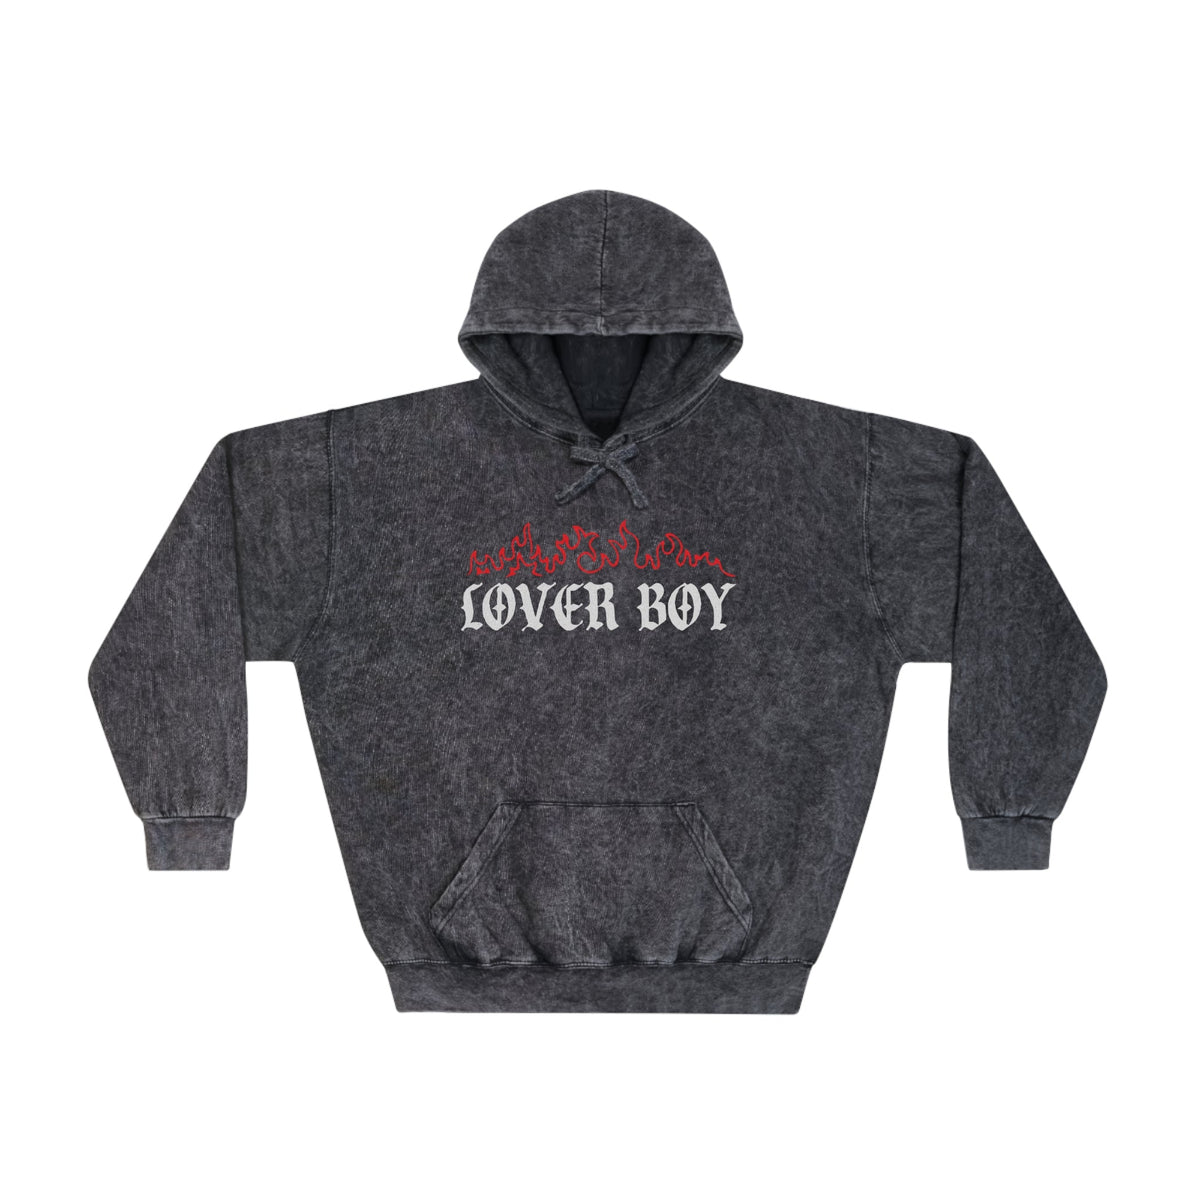 Lover Boy Flaming Gothic Hoodie - Goth Cloth Co.Hoodie32470454157893594121